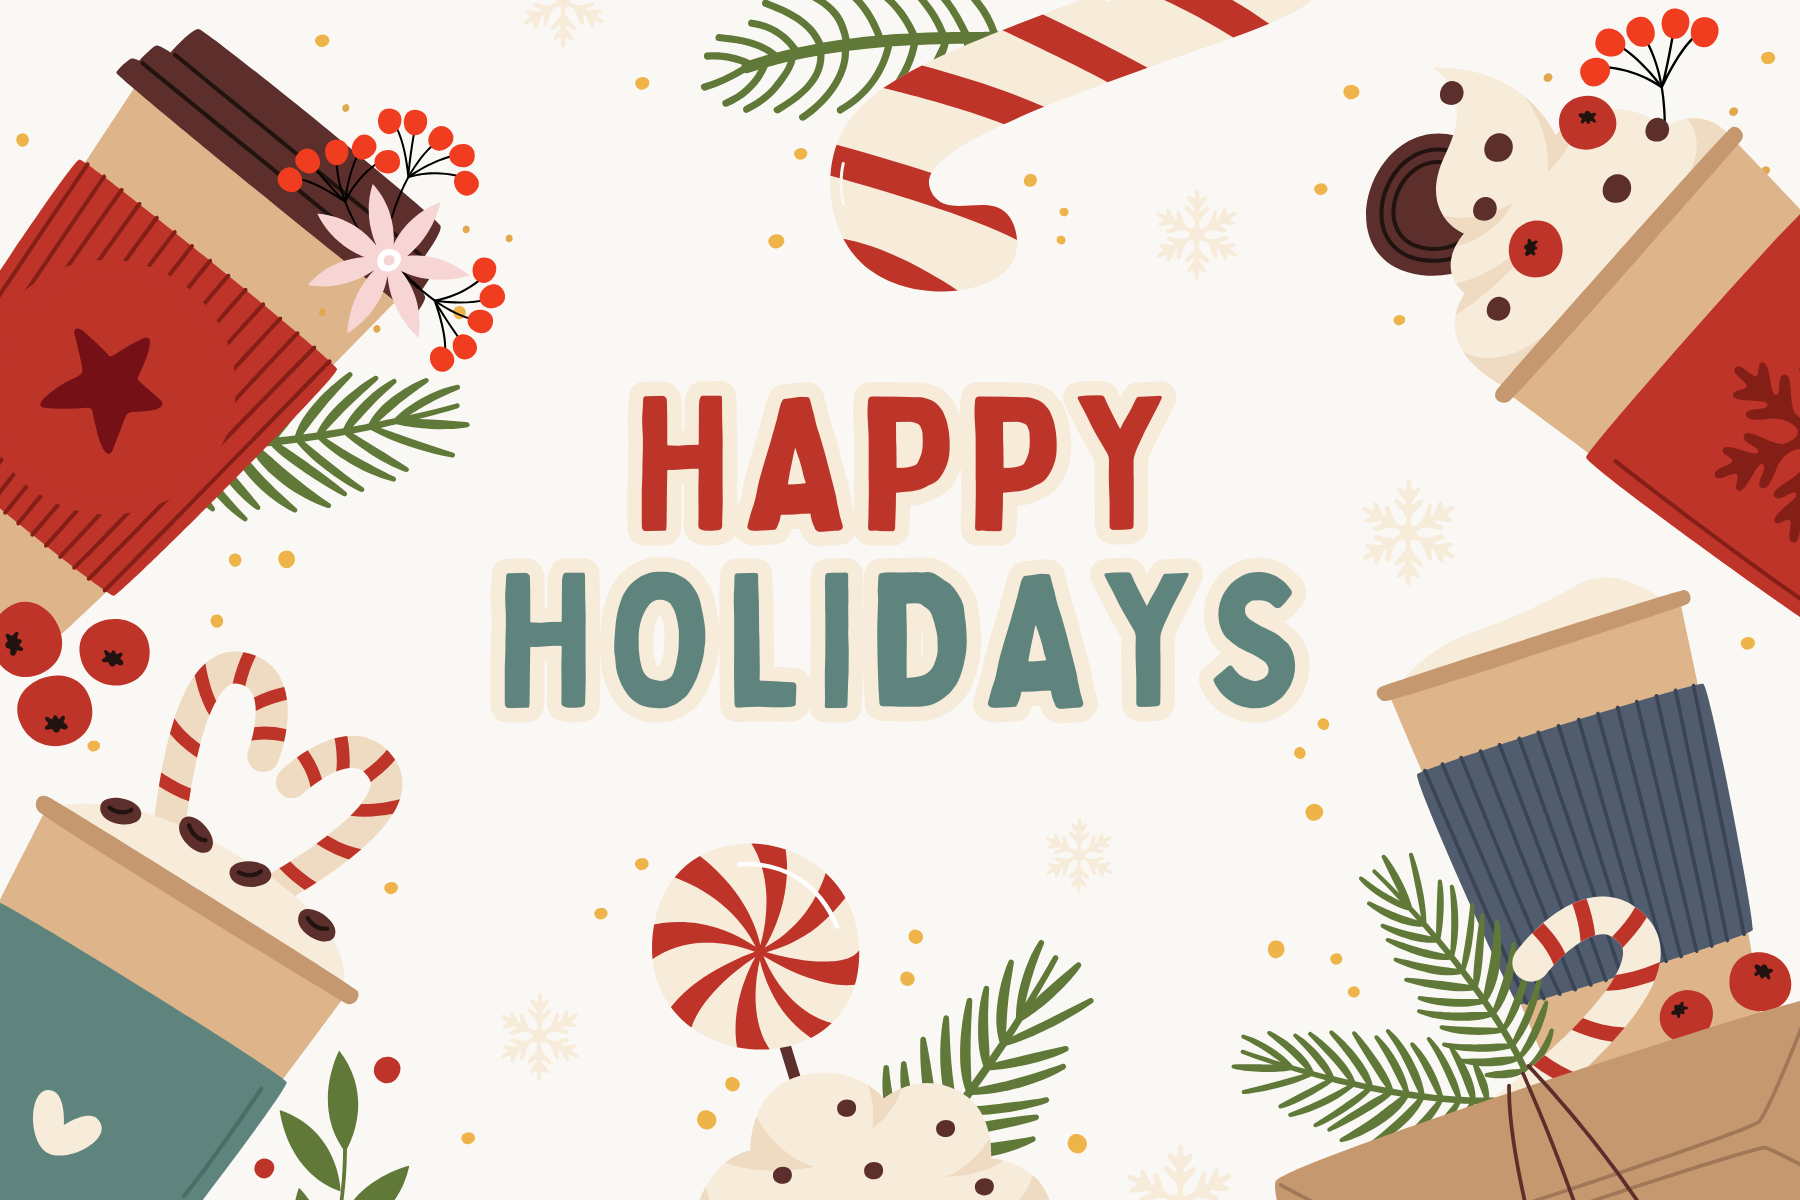 A happy holidays graphic with green and red mittens and coffee cups.